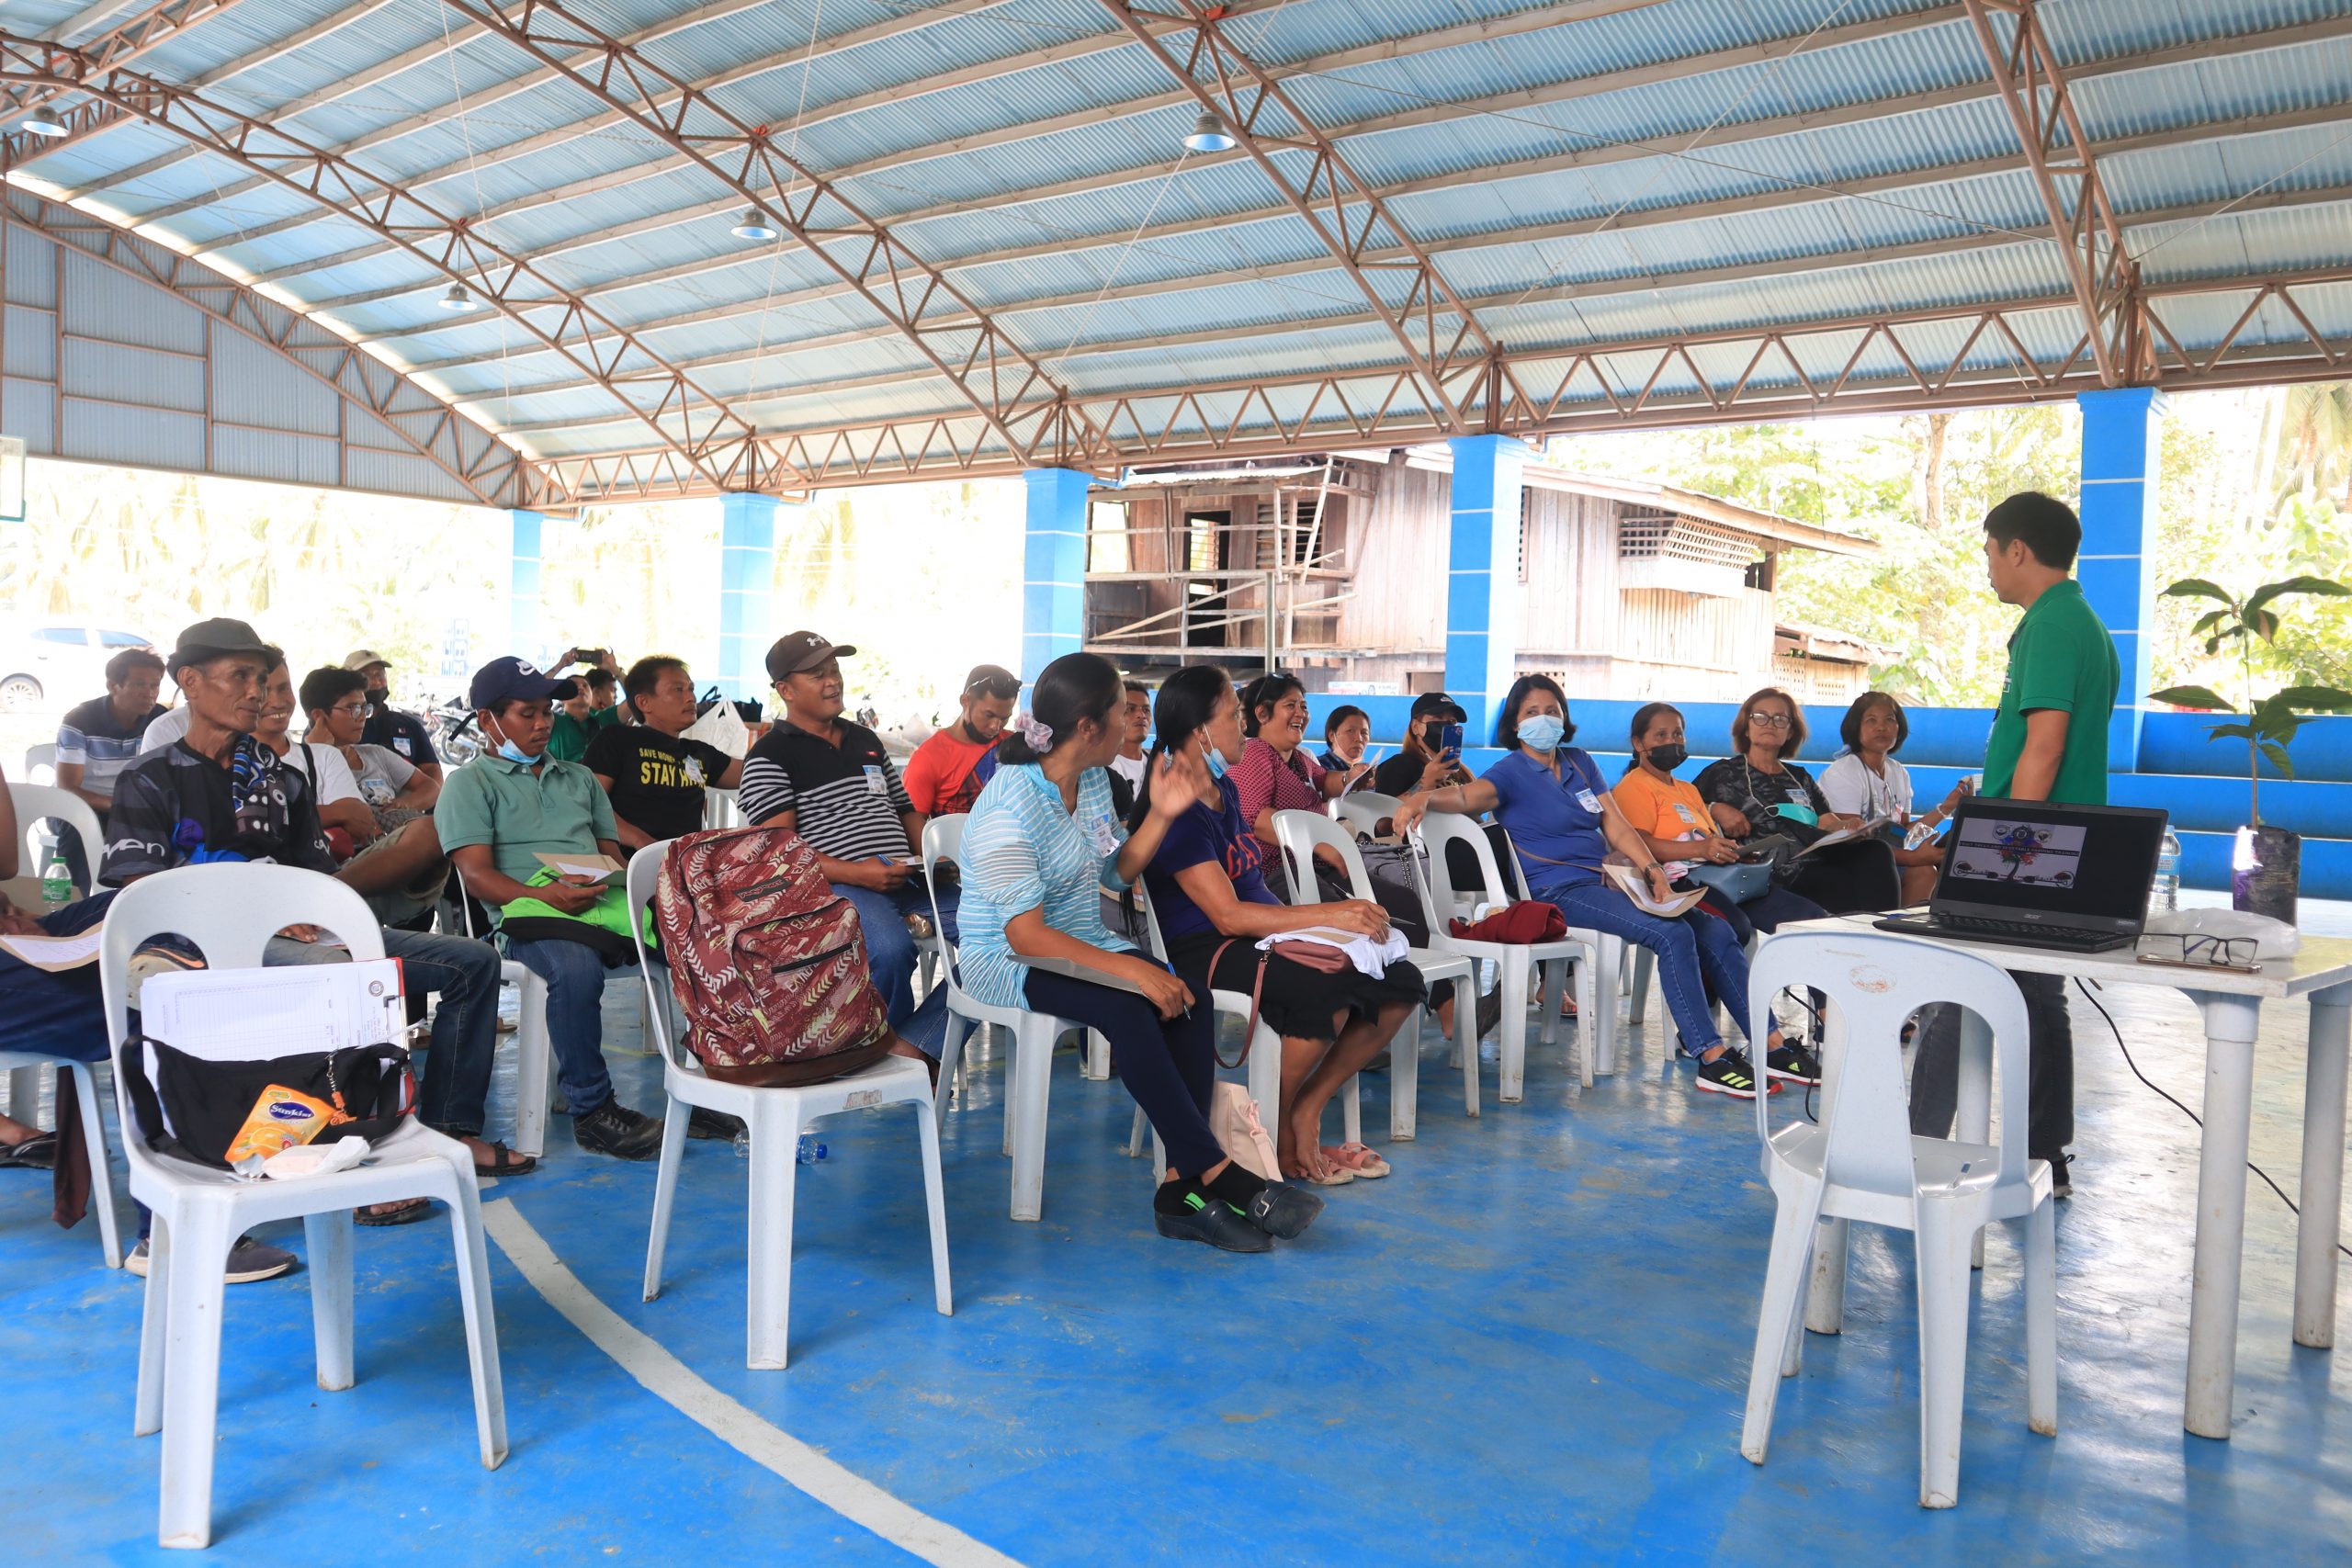 NOVEMBER 03, 2022 – 30 REPRESENTATIVES FROM FARMERS ASSOCIATIONS OF PAQUIBATO DISTRICT AND 4 BARANGAYS OF CALINAN DISTRICT WERE GIVEN FRUIT TREES AND VEGETABLE FARMING TRAINING BY PEACE 911 AND CITY AGRICULTURIST’S OFFICE (CAGRO) AT PAÑALUM GYMNASIUM, PAQUIBATO DISTRICT, DAVAO CITY.